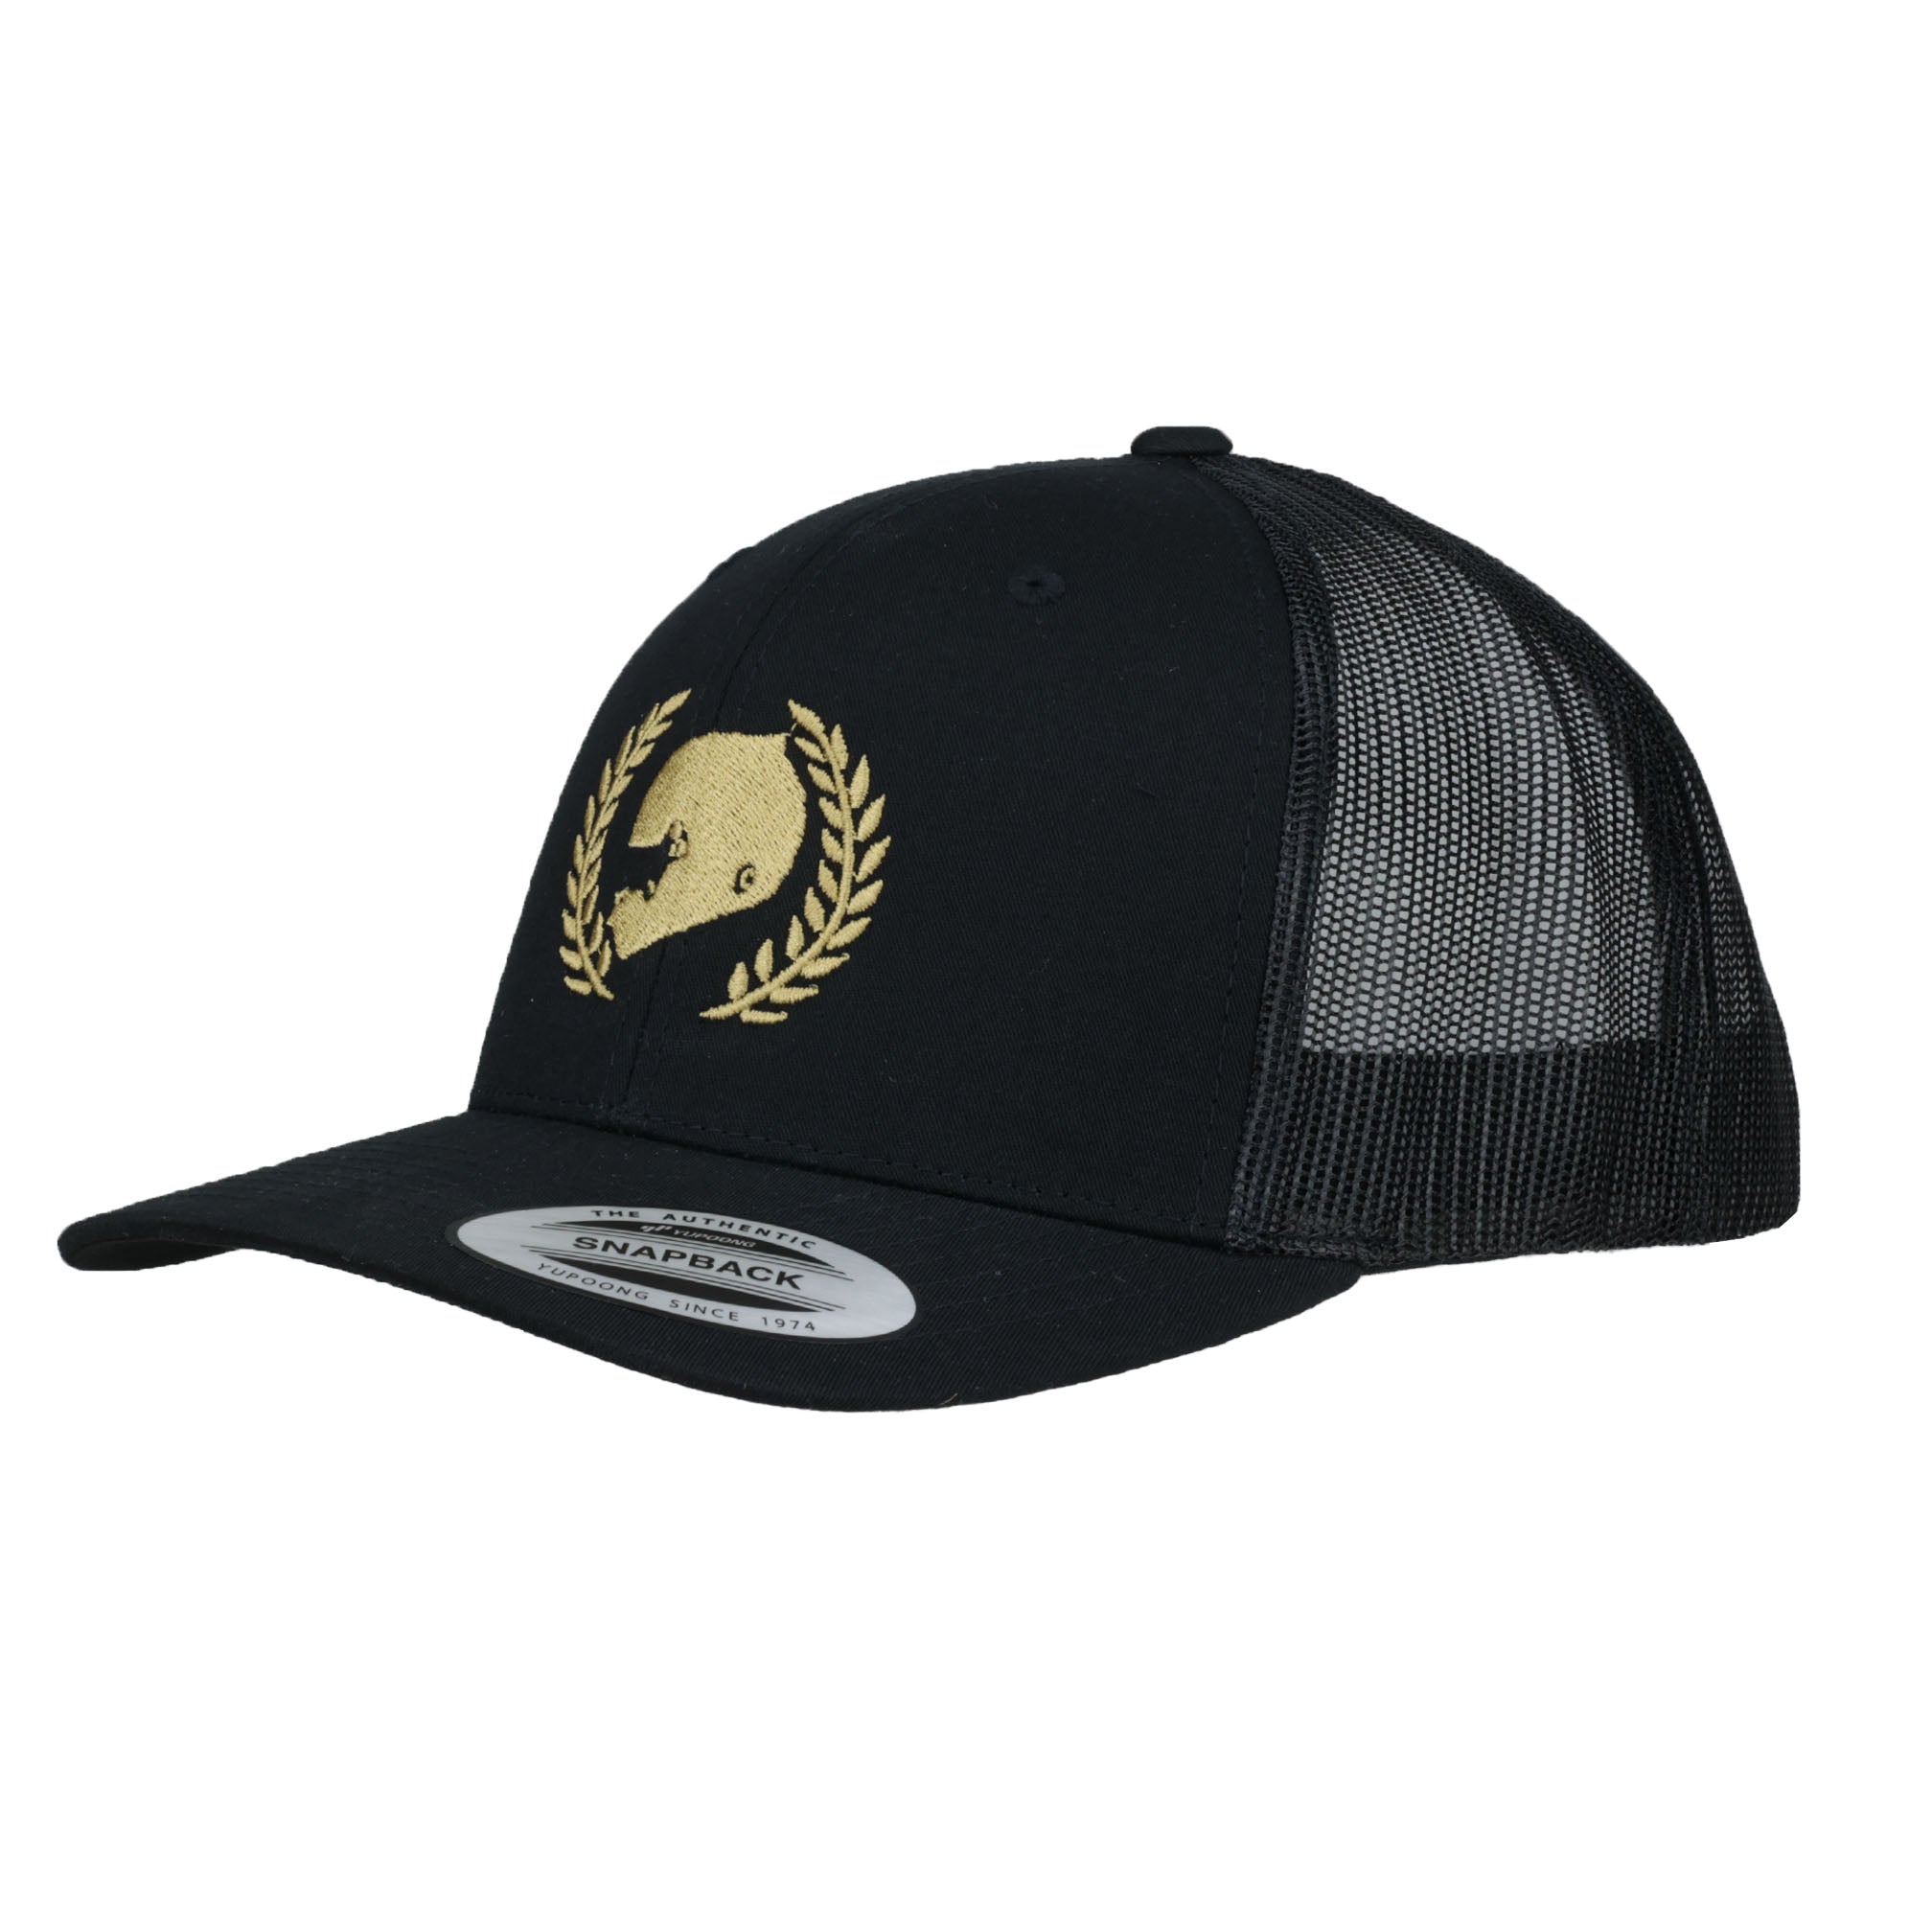 Official Hall of Fame Collection Limited Edition Gold Hat